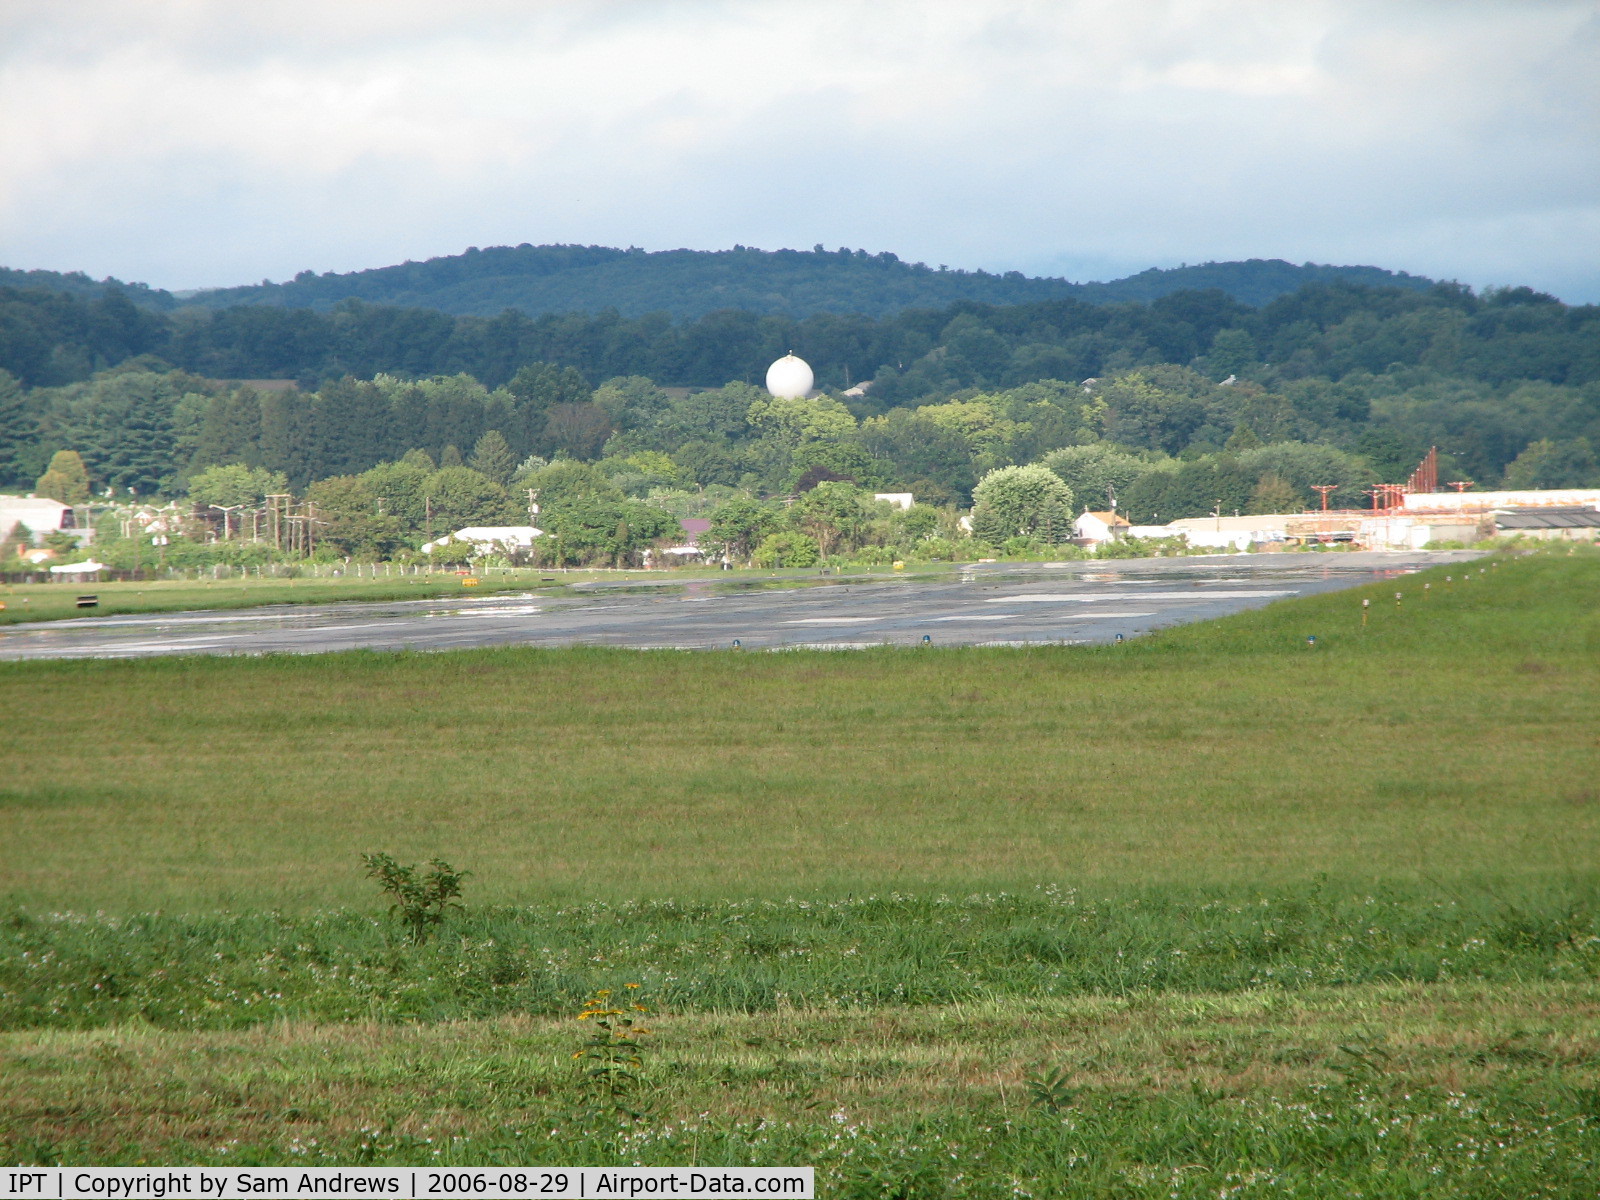 Williamsport Regional Airport (IPT) - Looking east from the approach end of RWY9